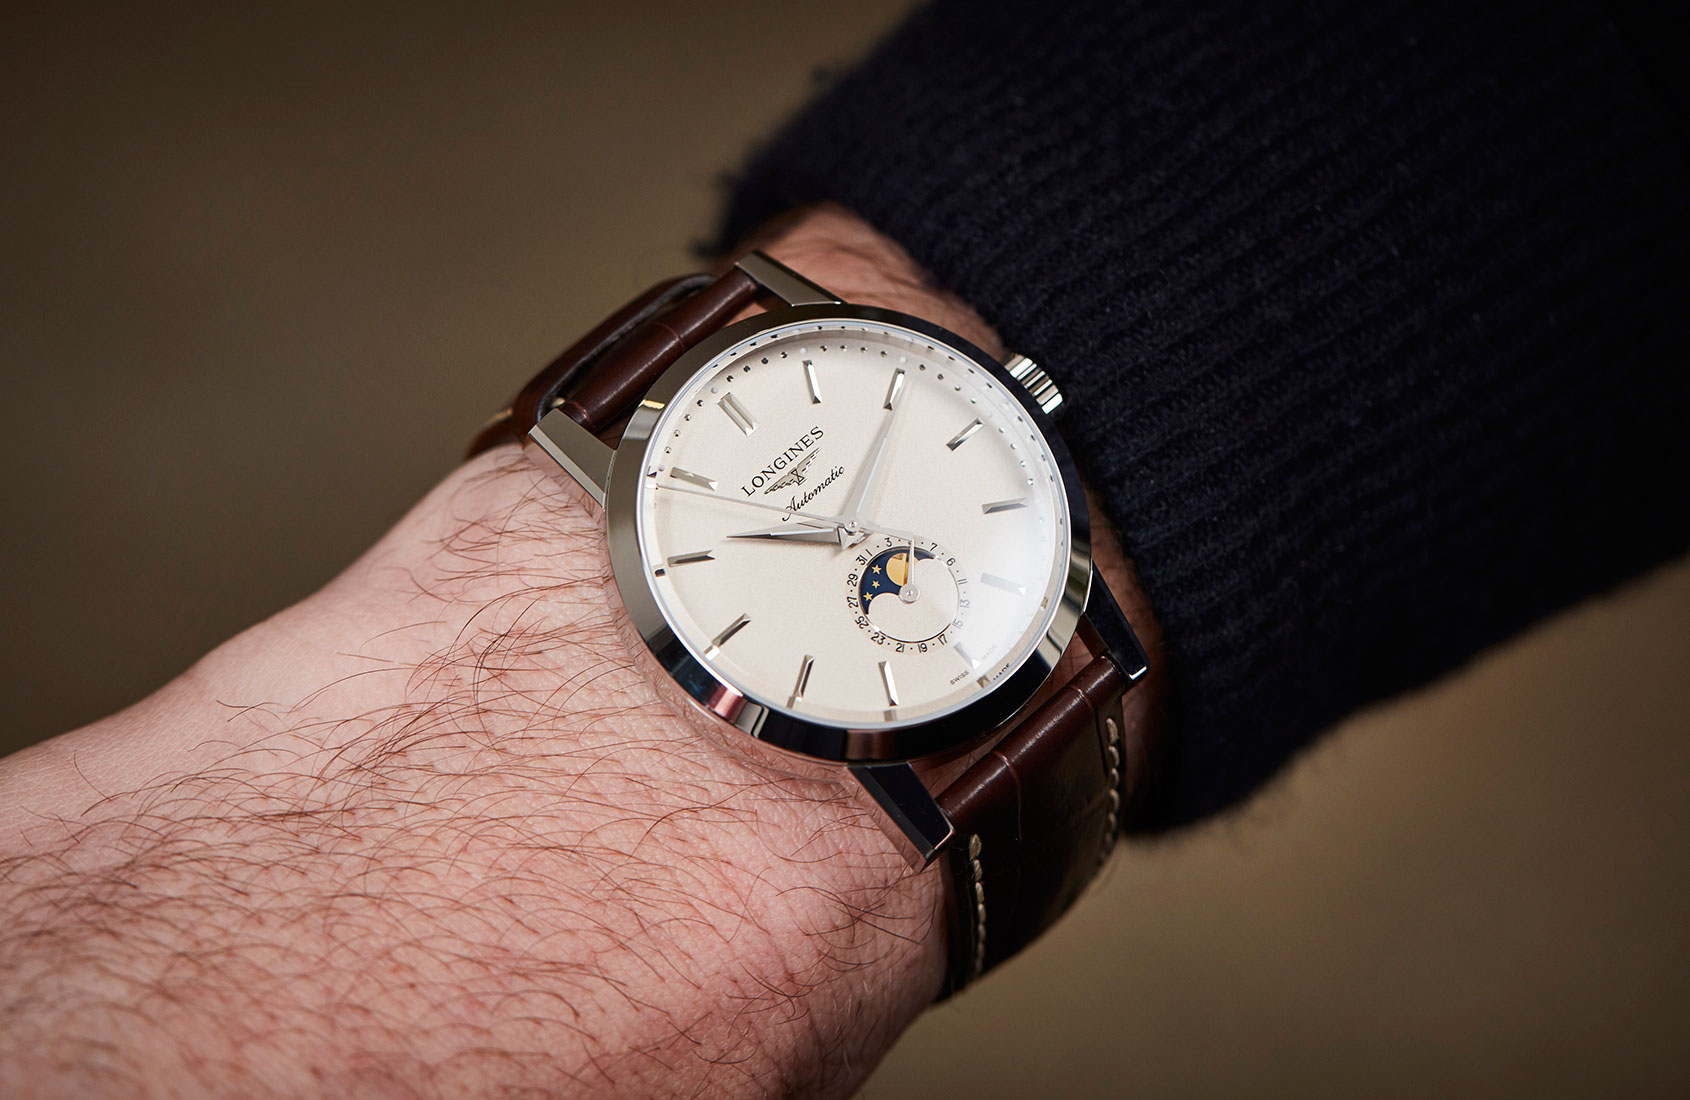 Longines 1832 Moonphase review